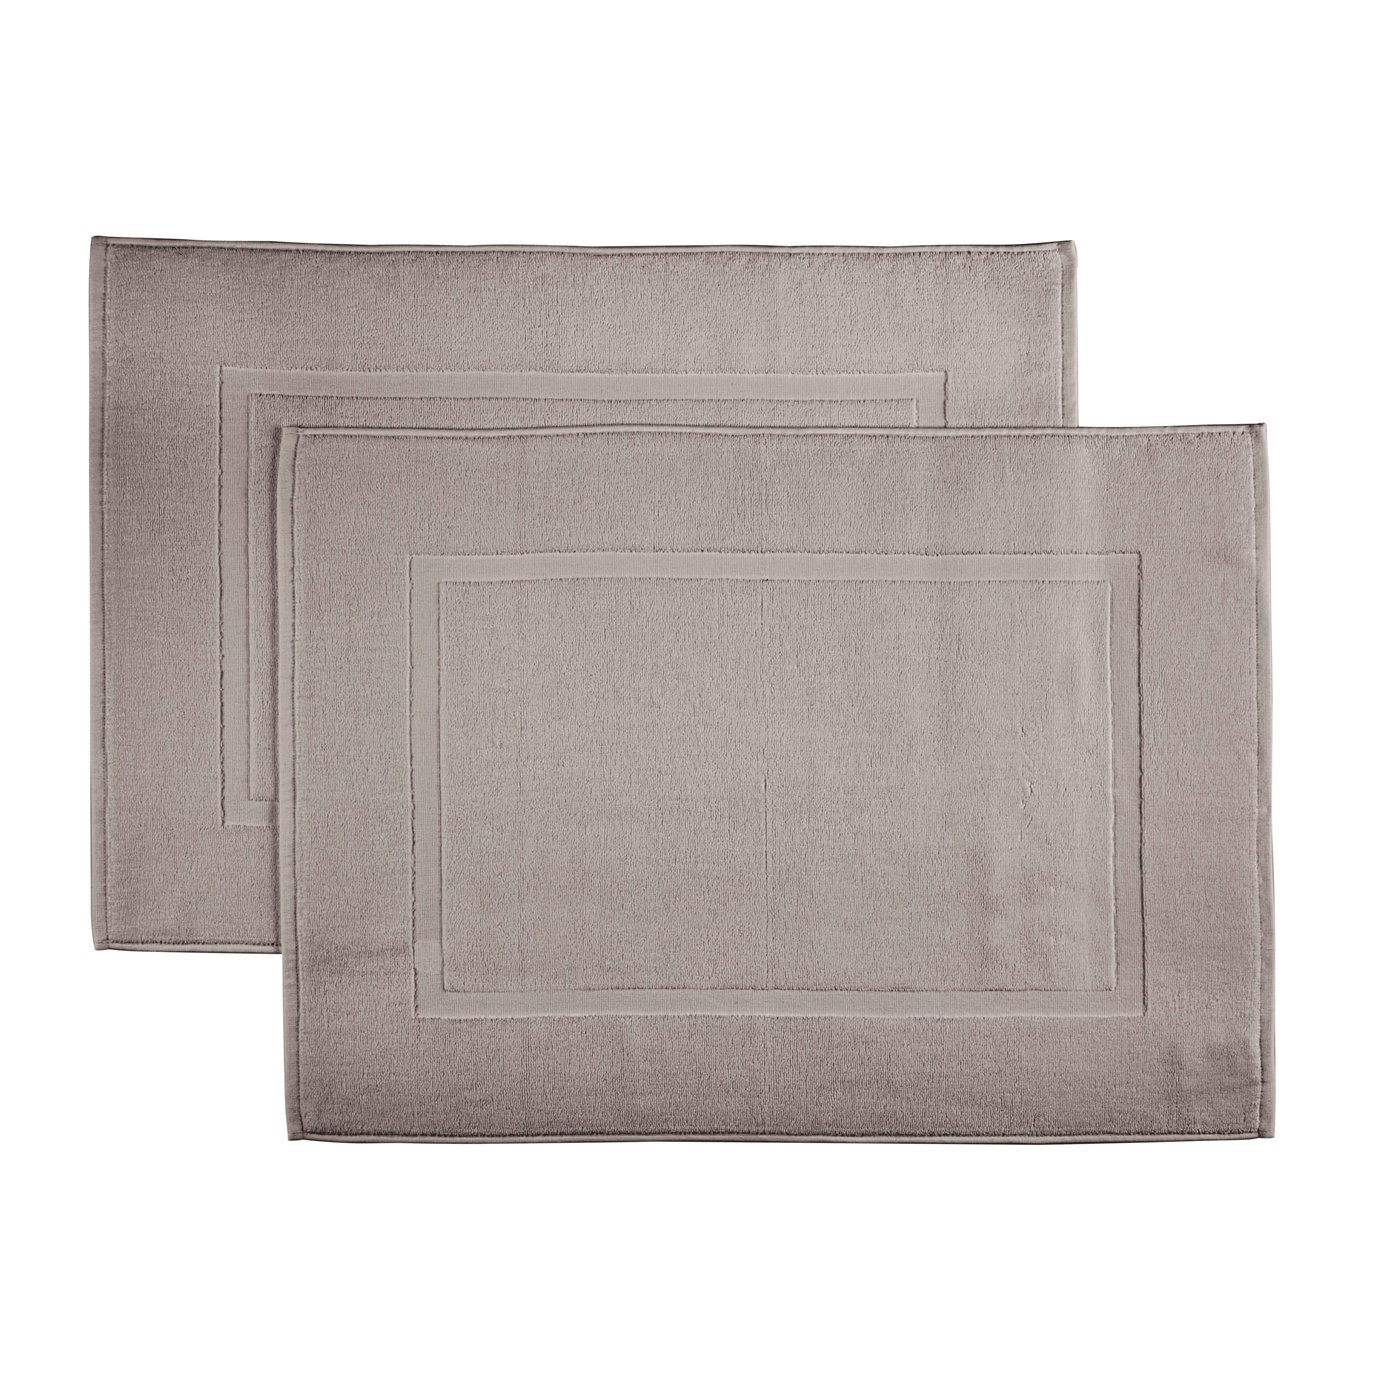 Martex Purity 2-Piece Taupe Tub Mat